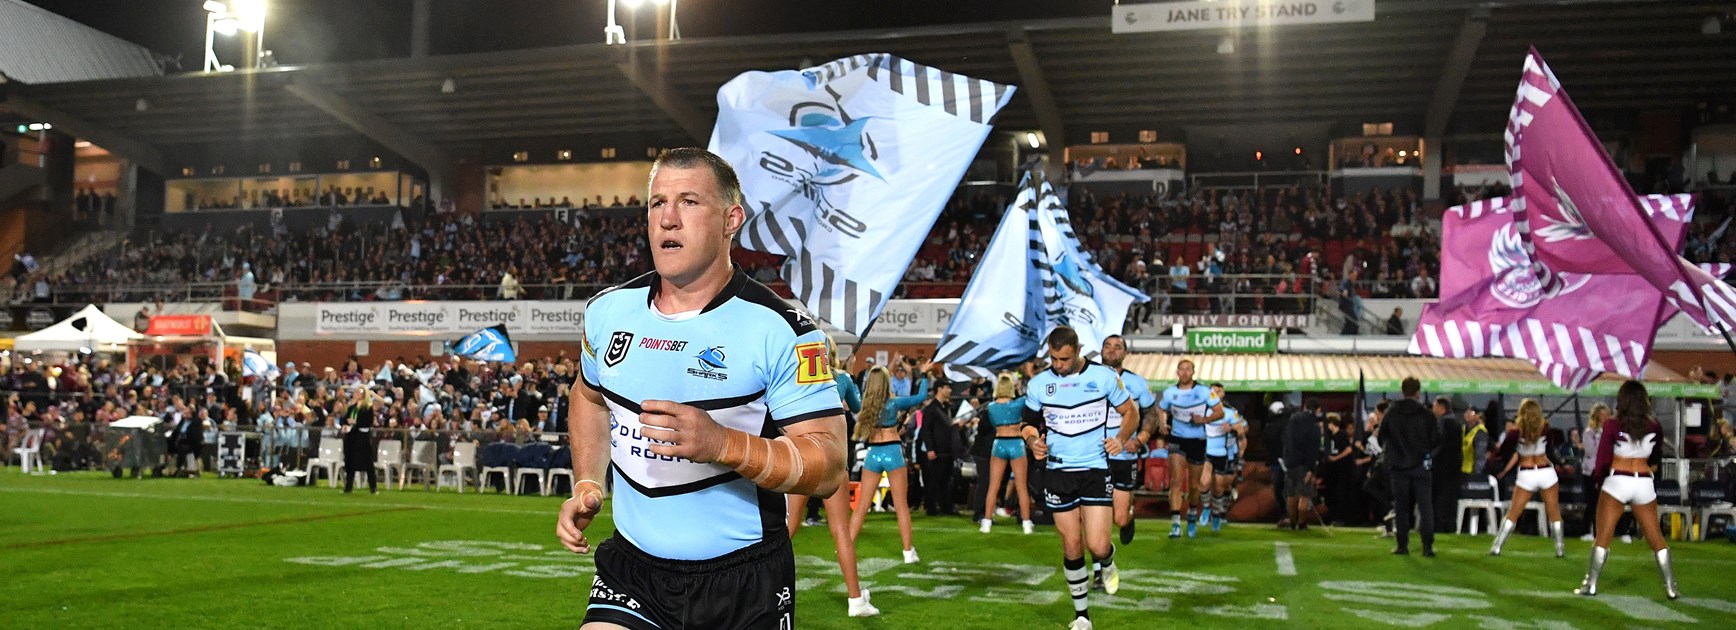 Paul Gallen running out for his final game.